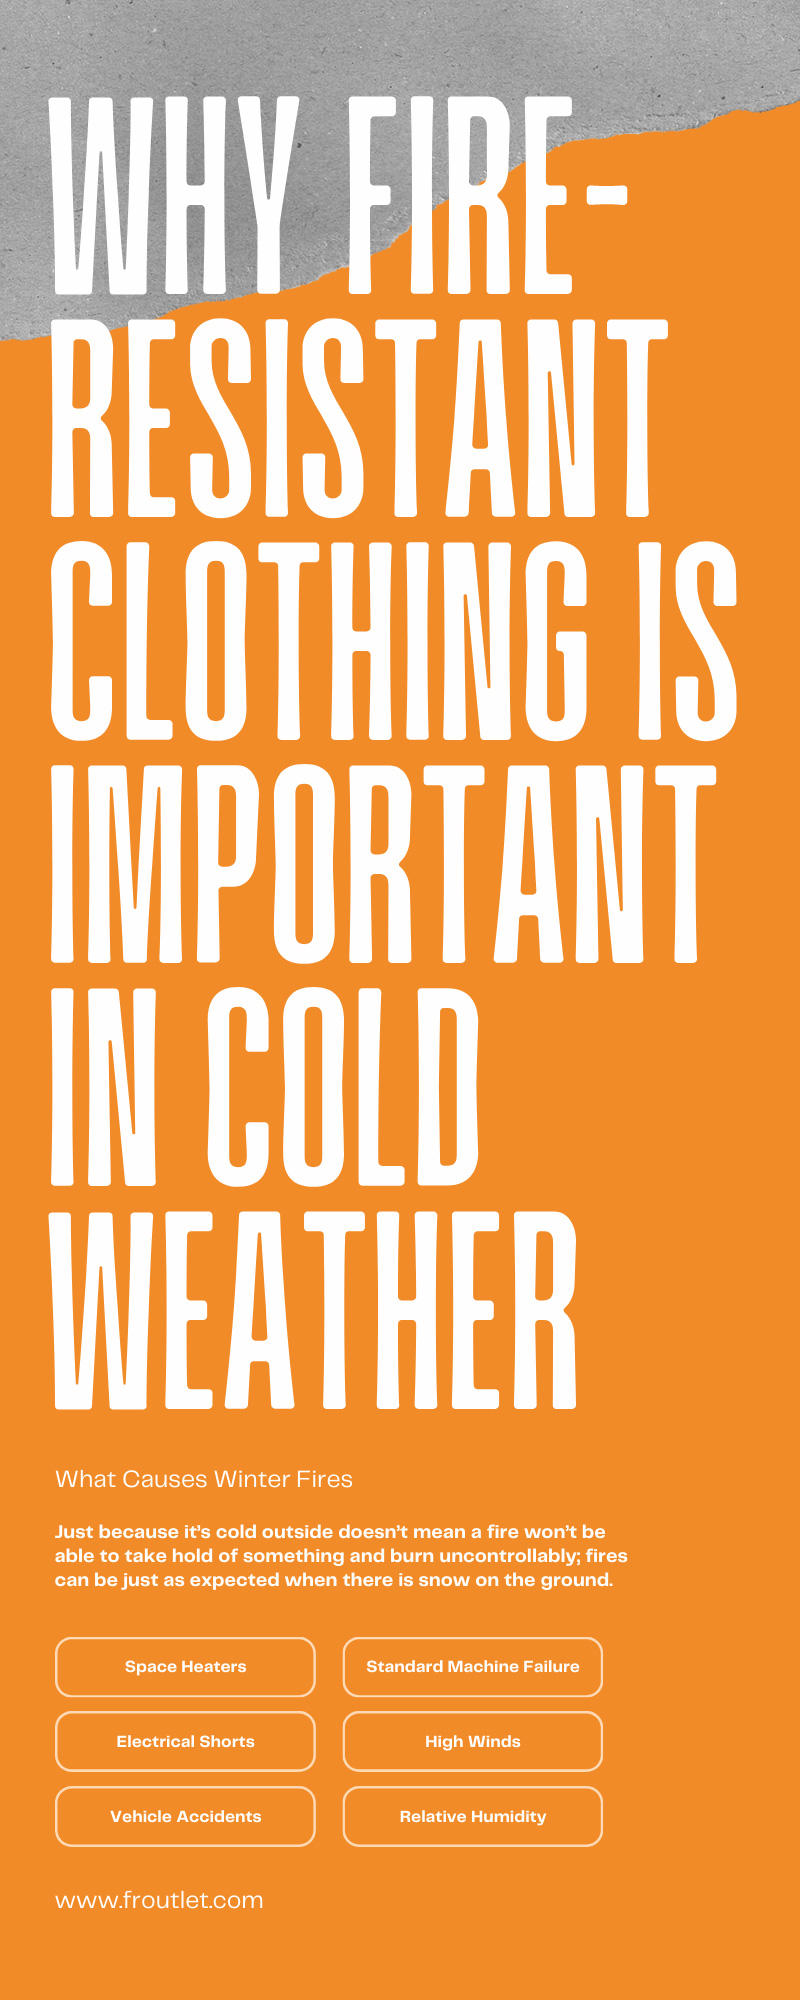 Why Fire-Resistant Clothing Is Important in Cold Weather